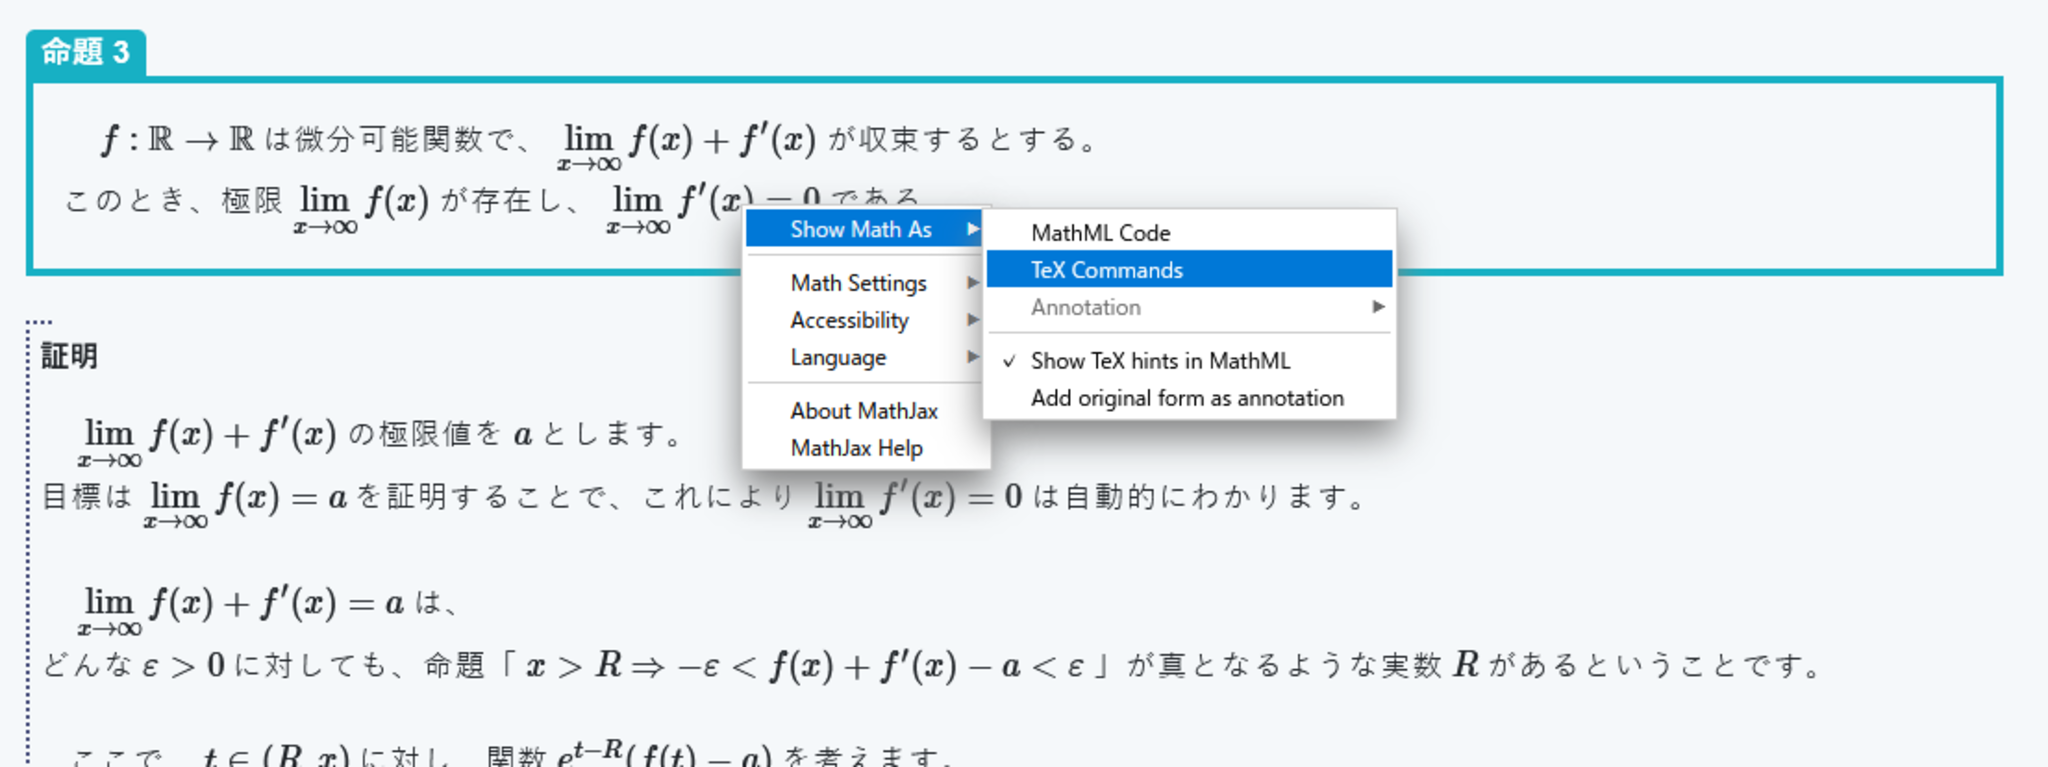 Show Math AsからTeX Commandsを選択